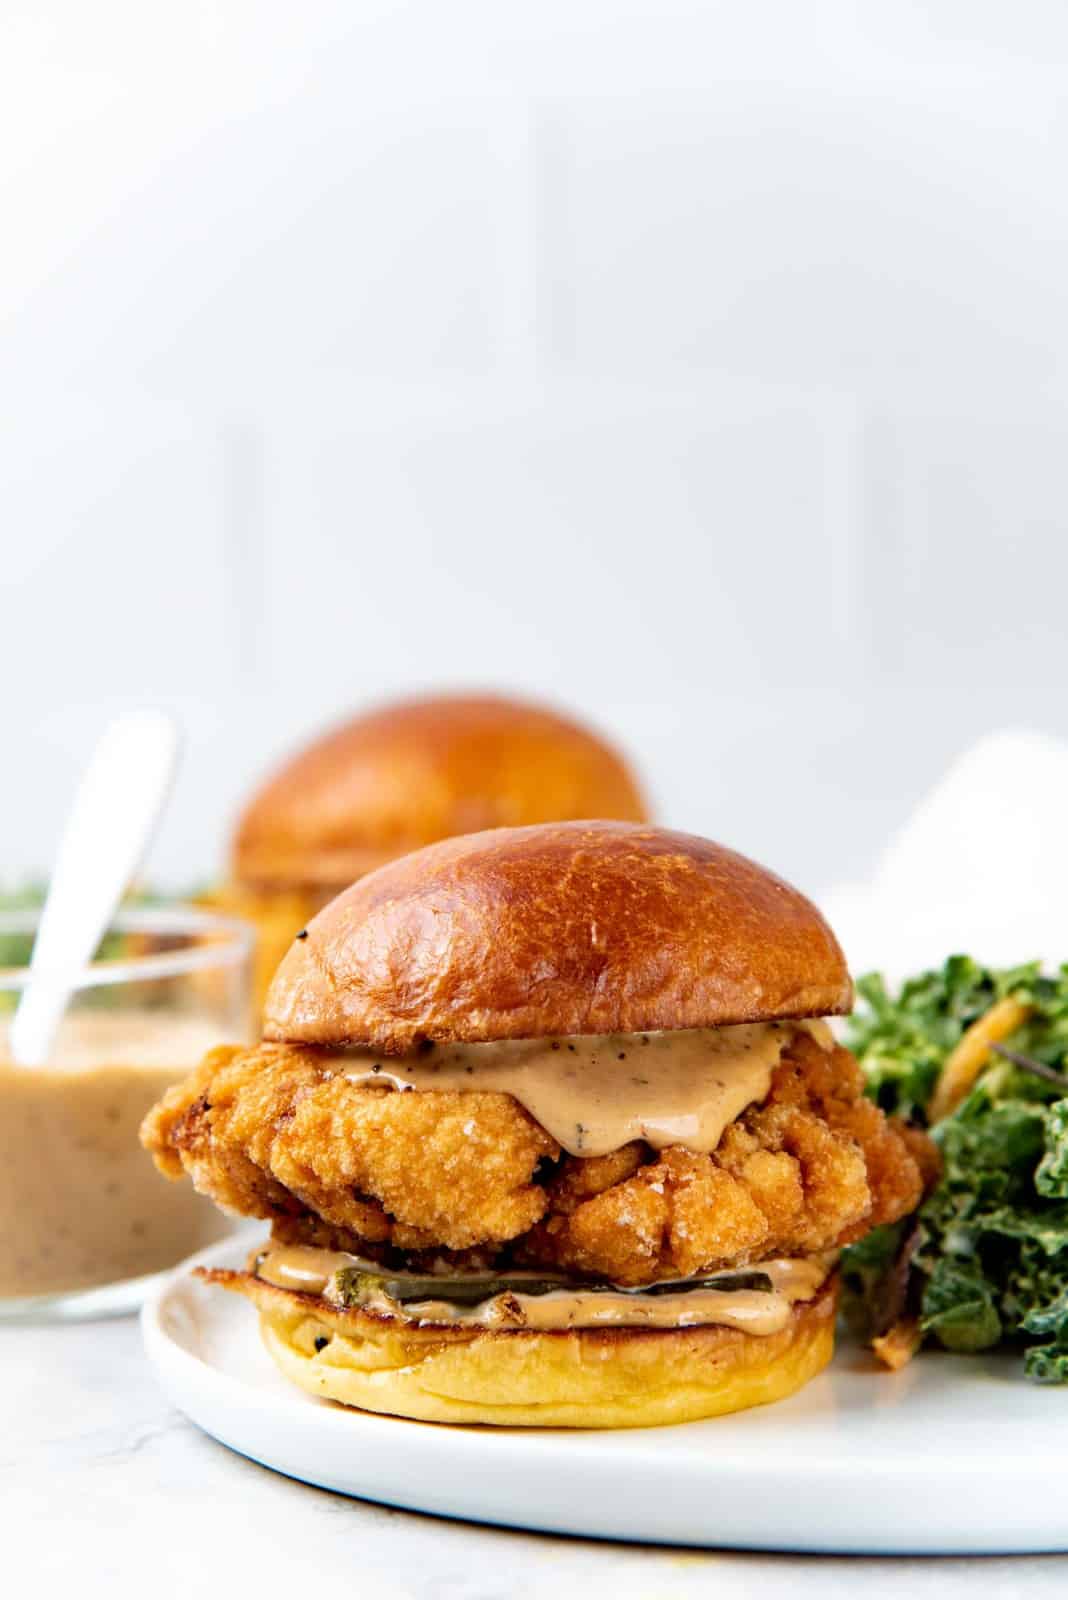 A close up of the fried chicken sandwich